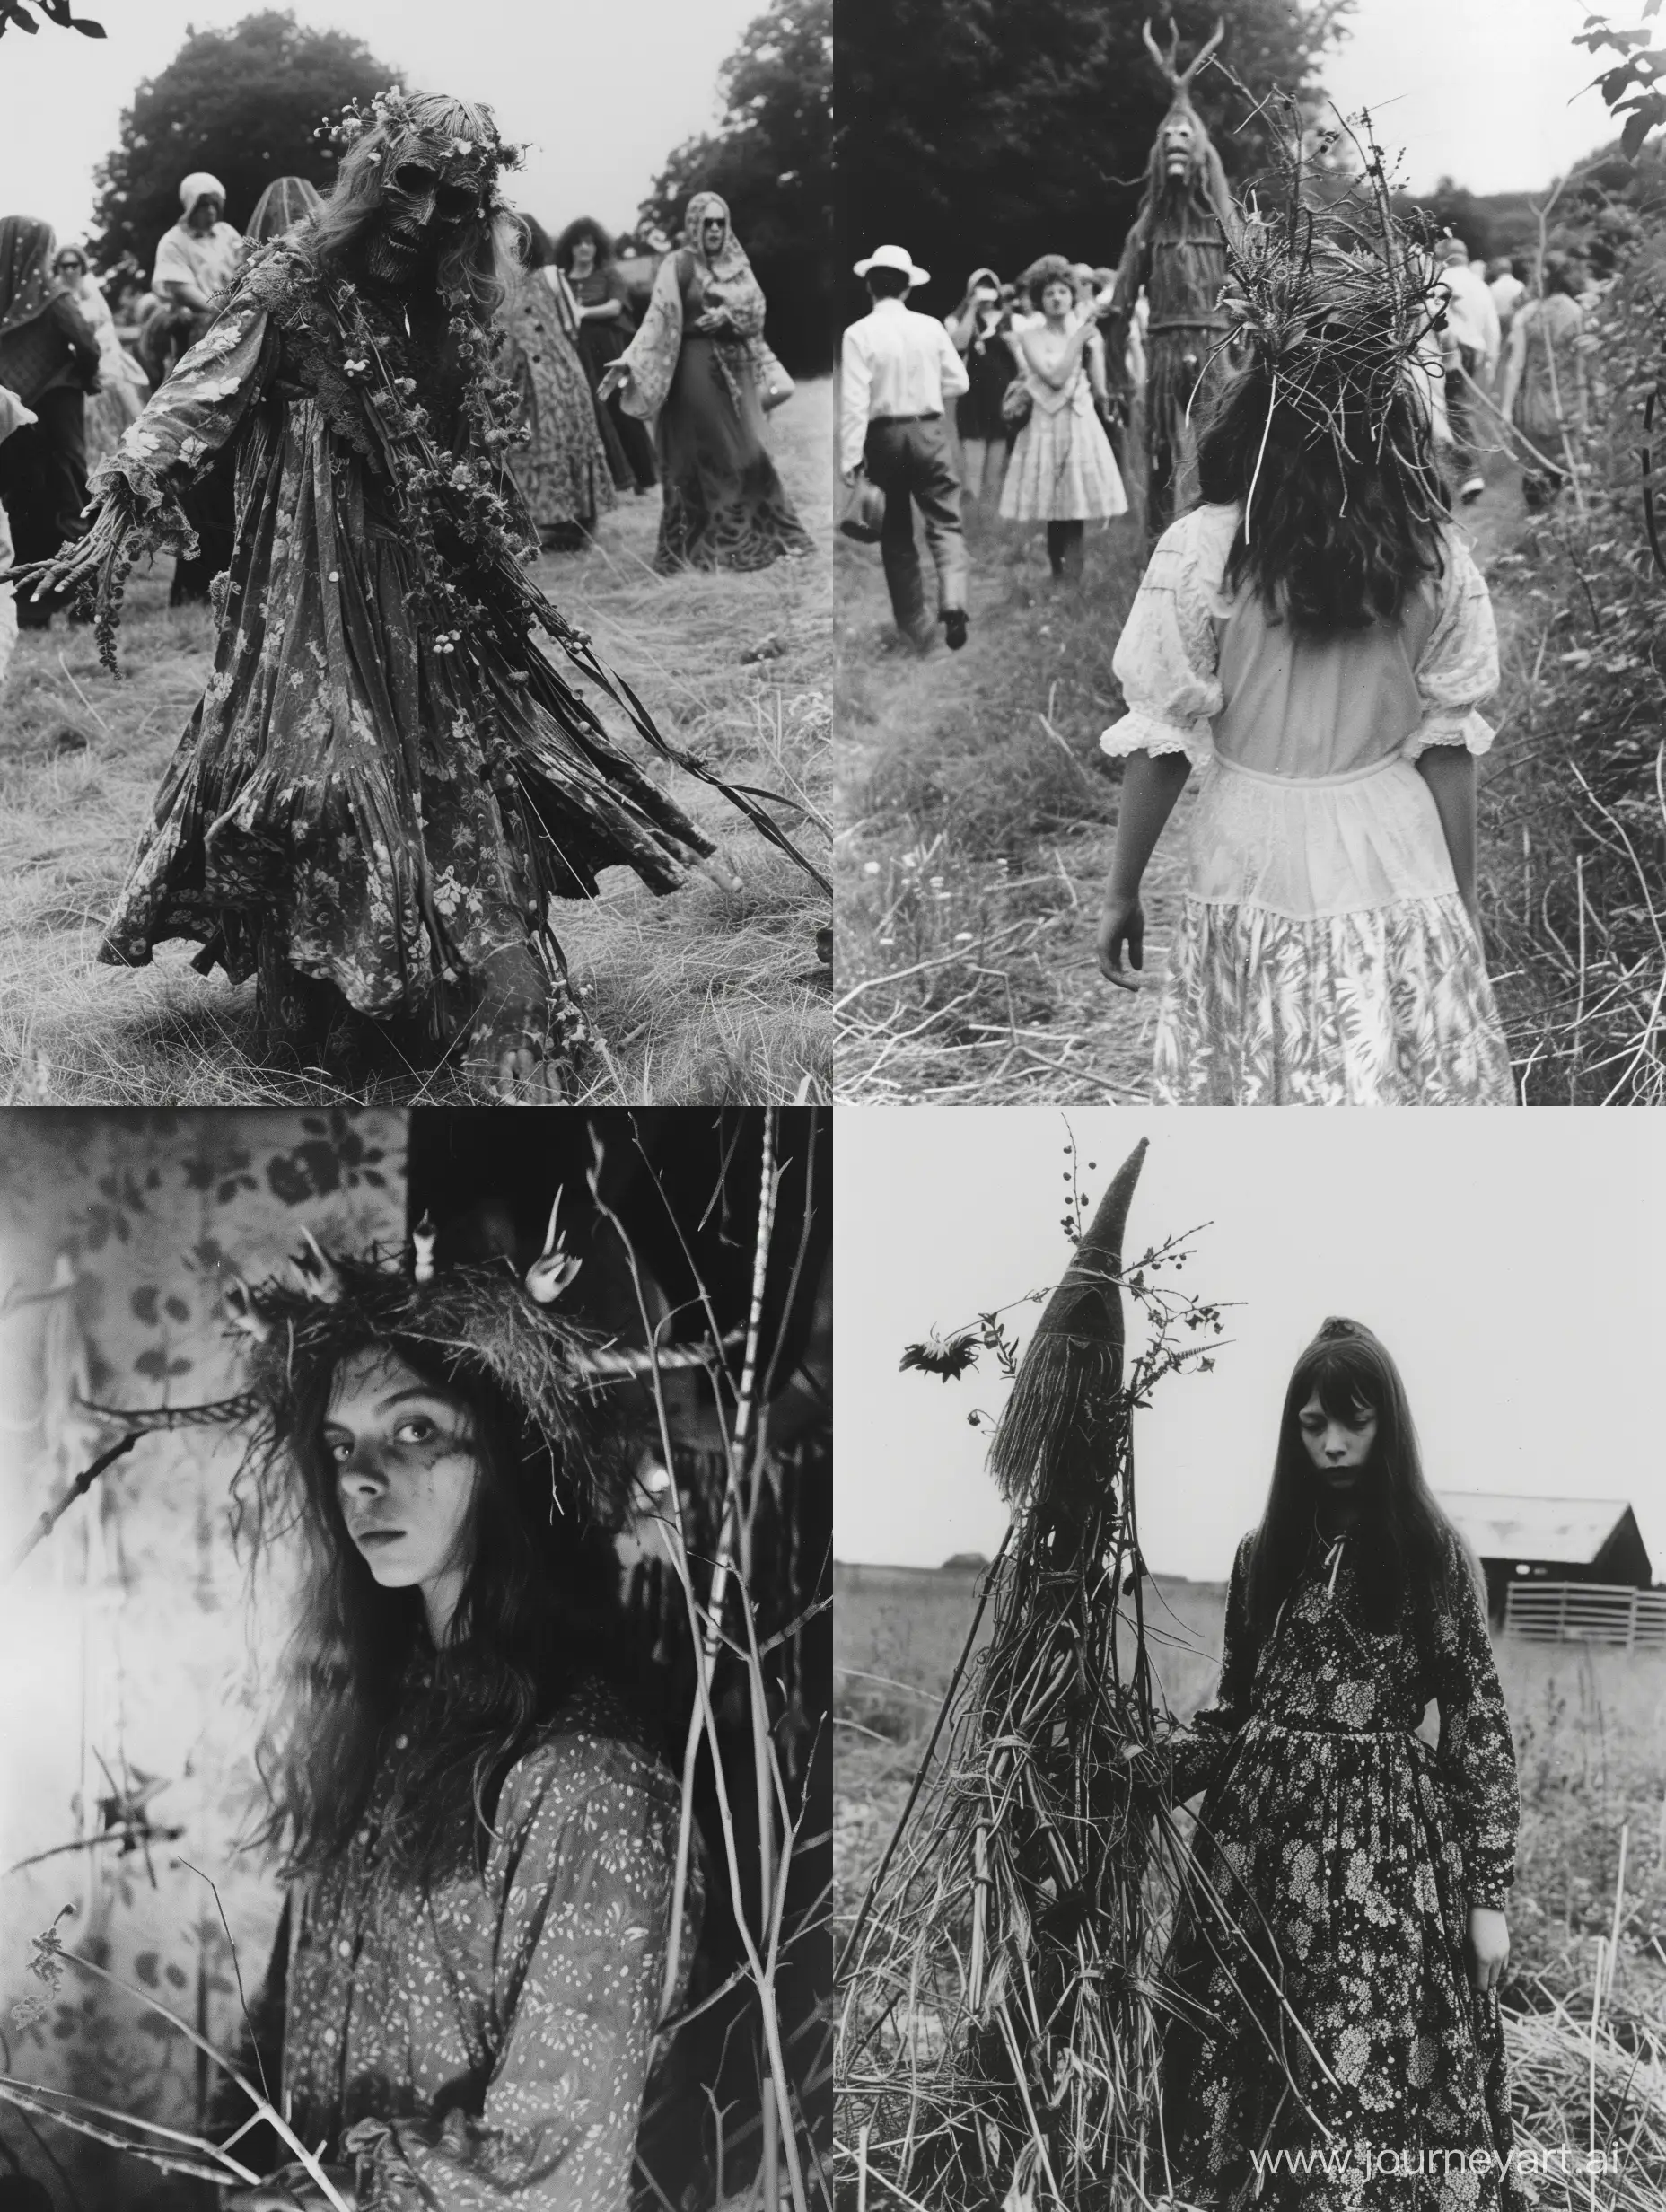 Eerie-1970s-Folk-Horror-Photography-Midsommarinspired-Ritual-in-British-Rural-Setting